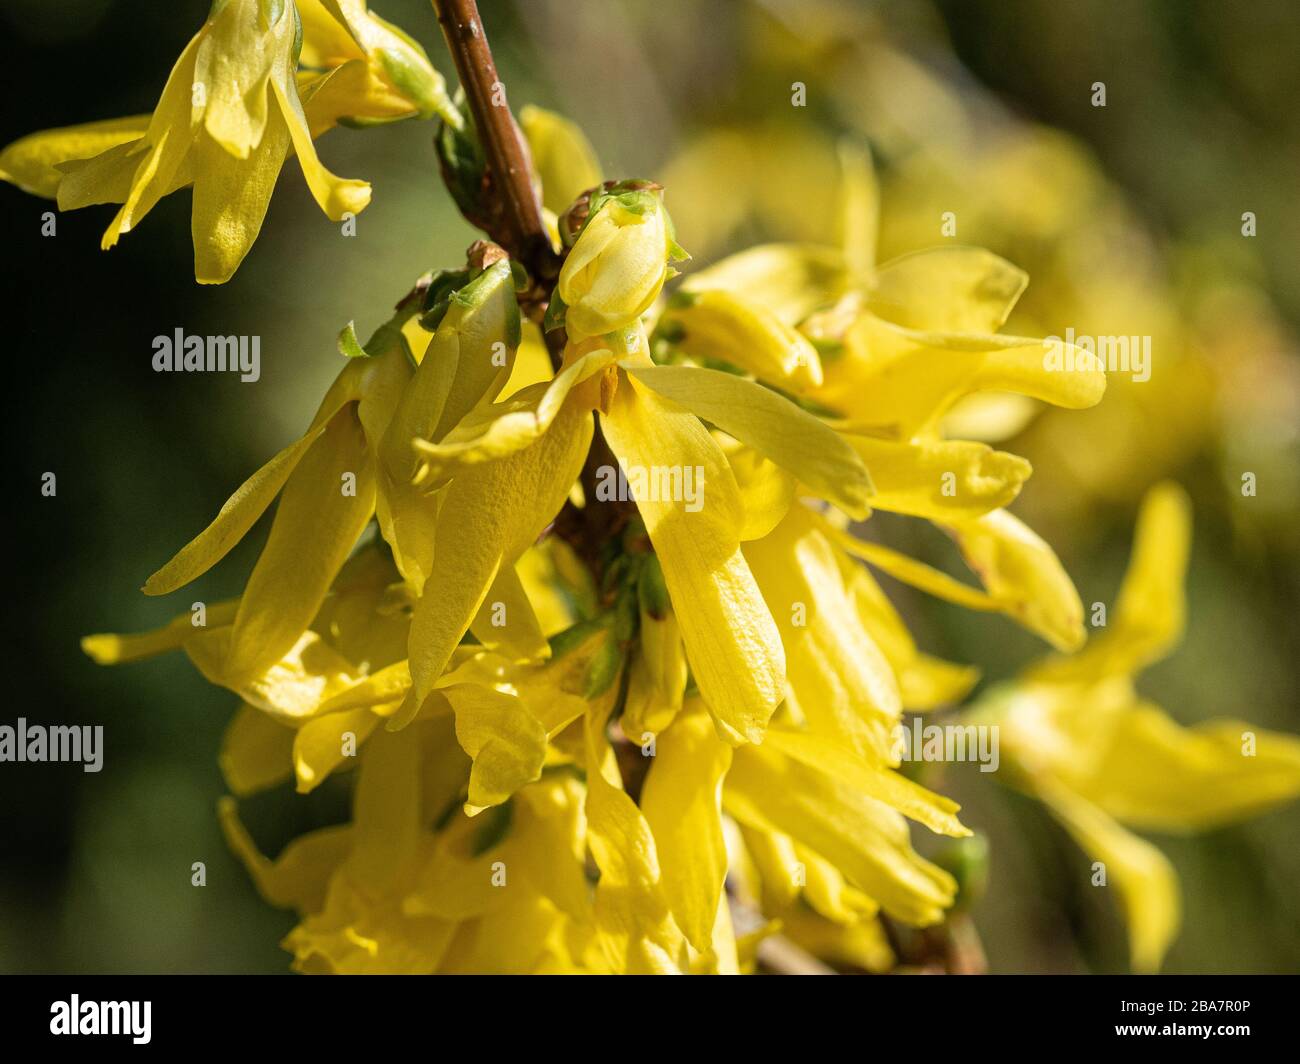 A close up of the clear yellow flowers of Forsythia x intermedia Spectabilis Stock Photo